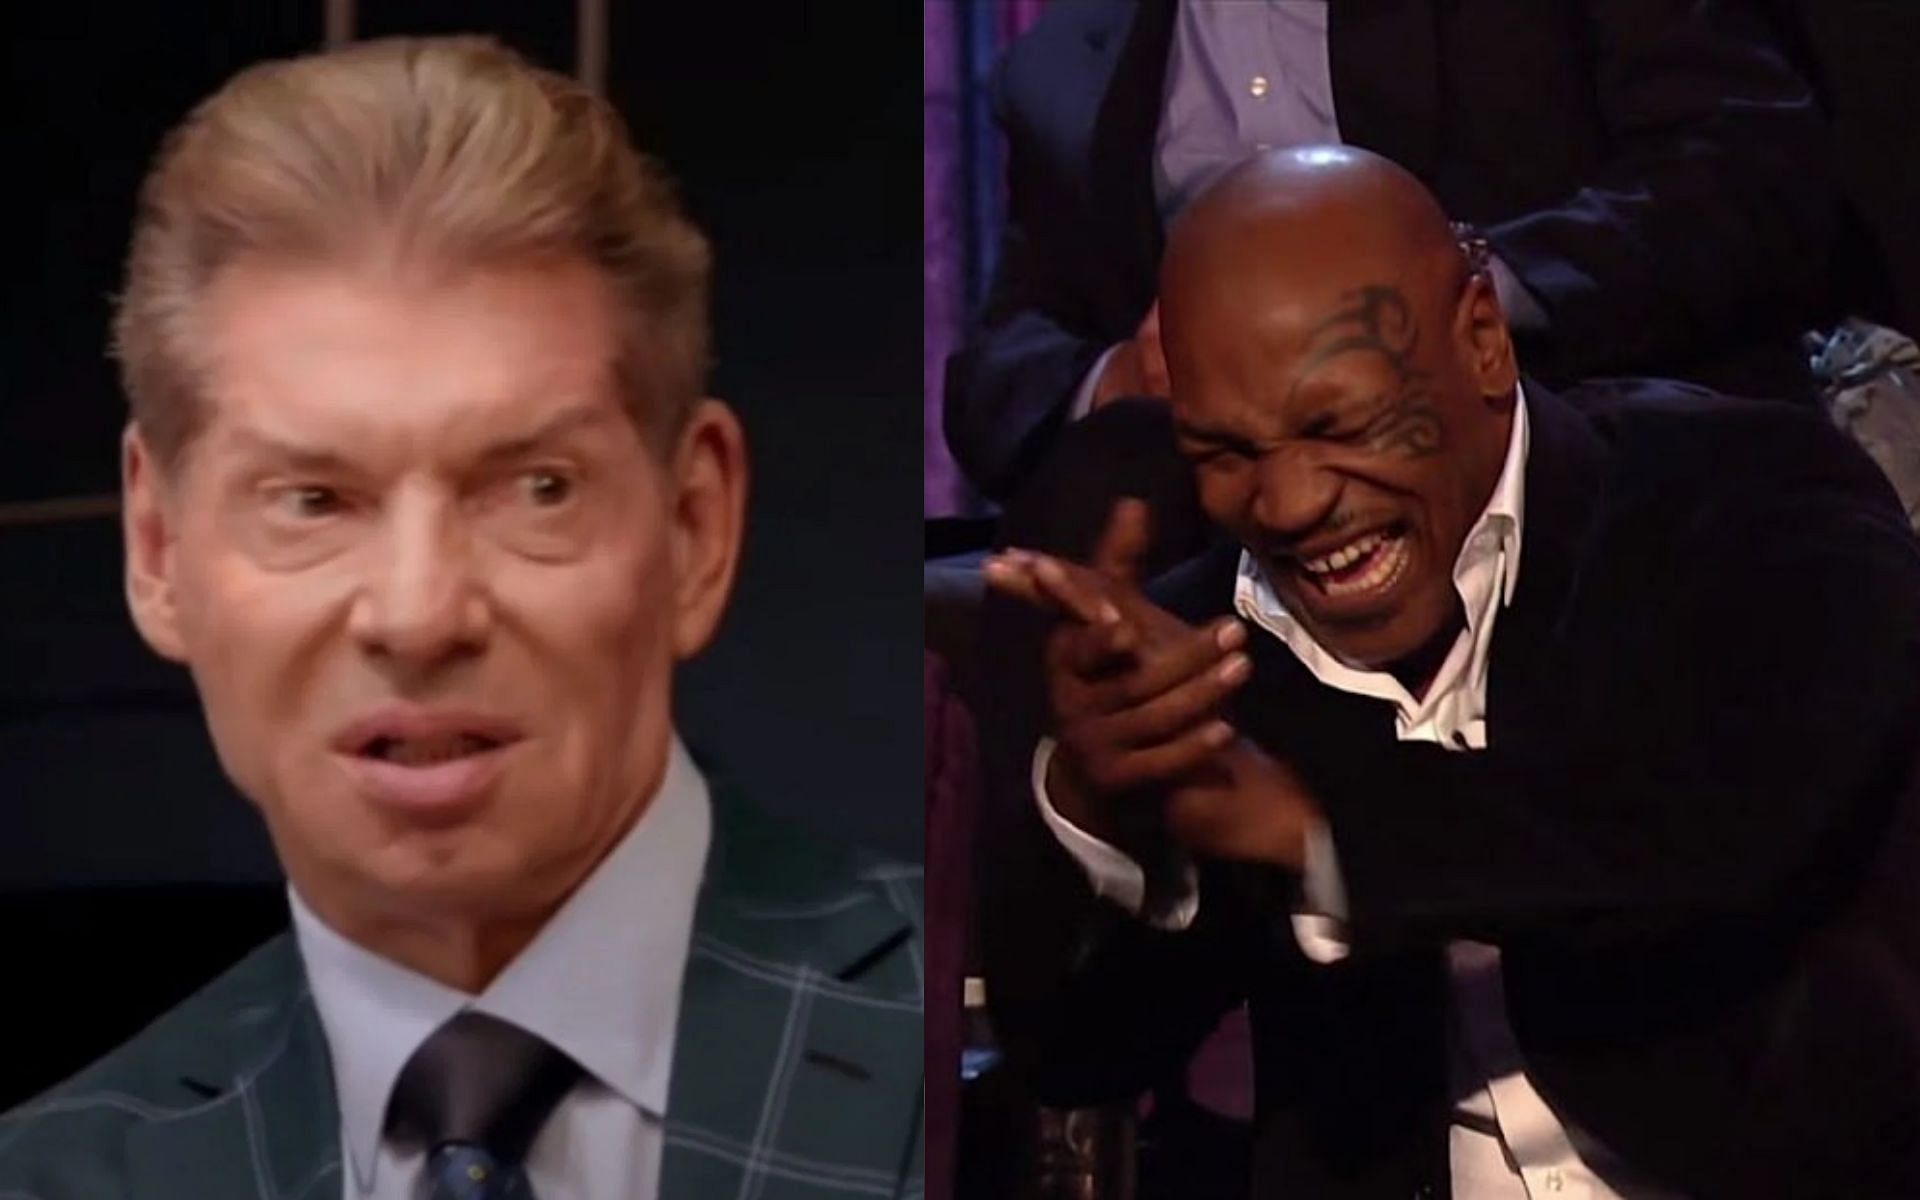 Vince McMahon brought in Mike Tyson to WWE just before the 1998 WrestleMania